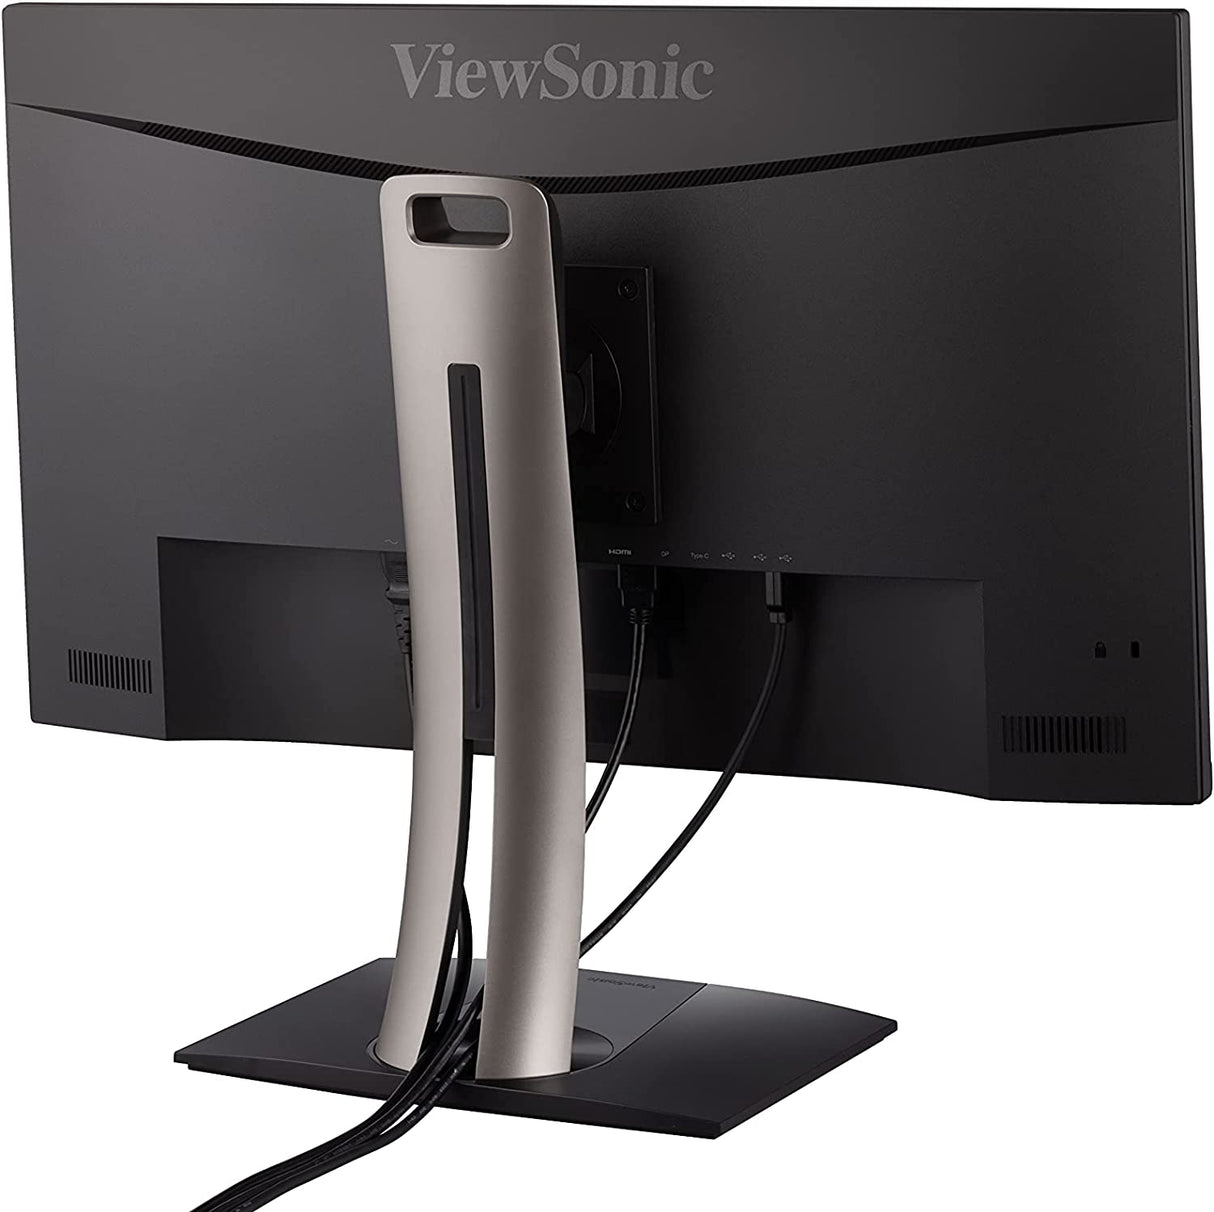 ViewSonic VP2756-2K 27 Inch Premium IPS 1440p Ergonomic Monitor with Ultra-Thin Bezels, Color Accuracy, Pantone Validated, HDMI, DisplayPort and USB Type C for Professional Home and Office 27-Inch 1440p